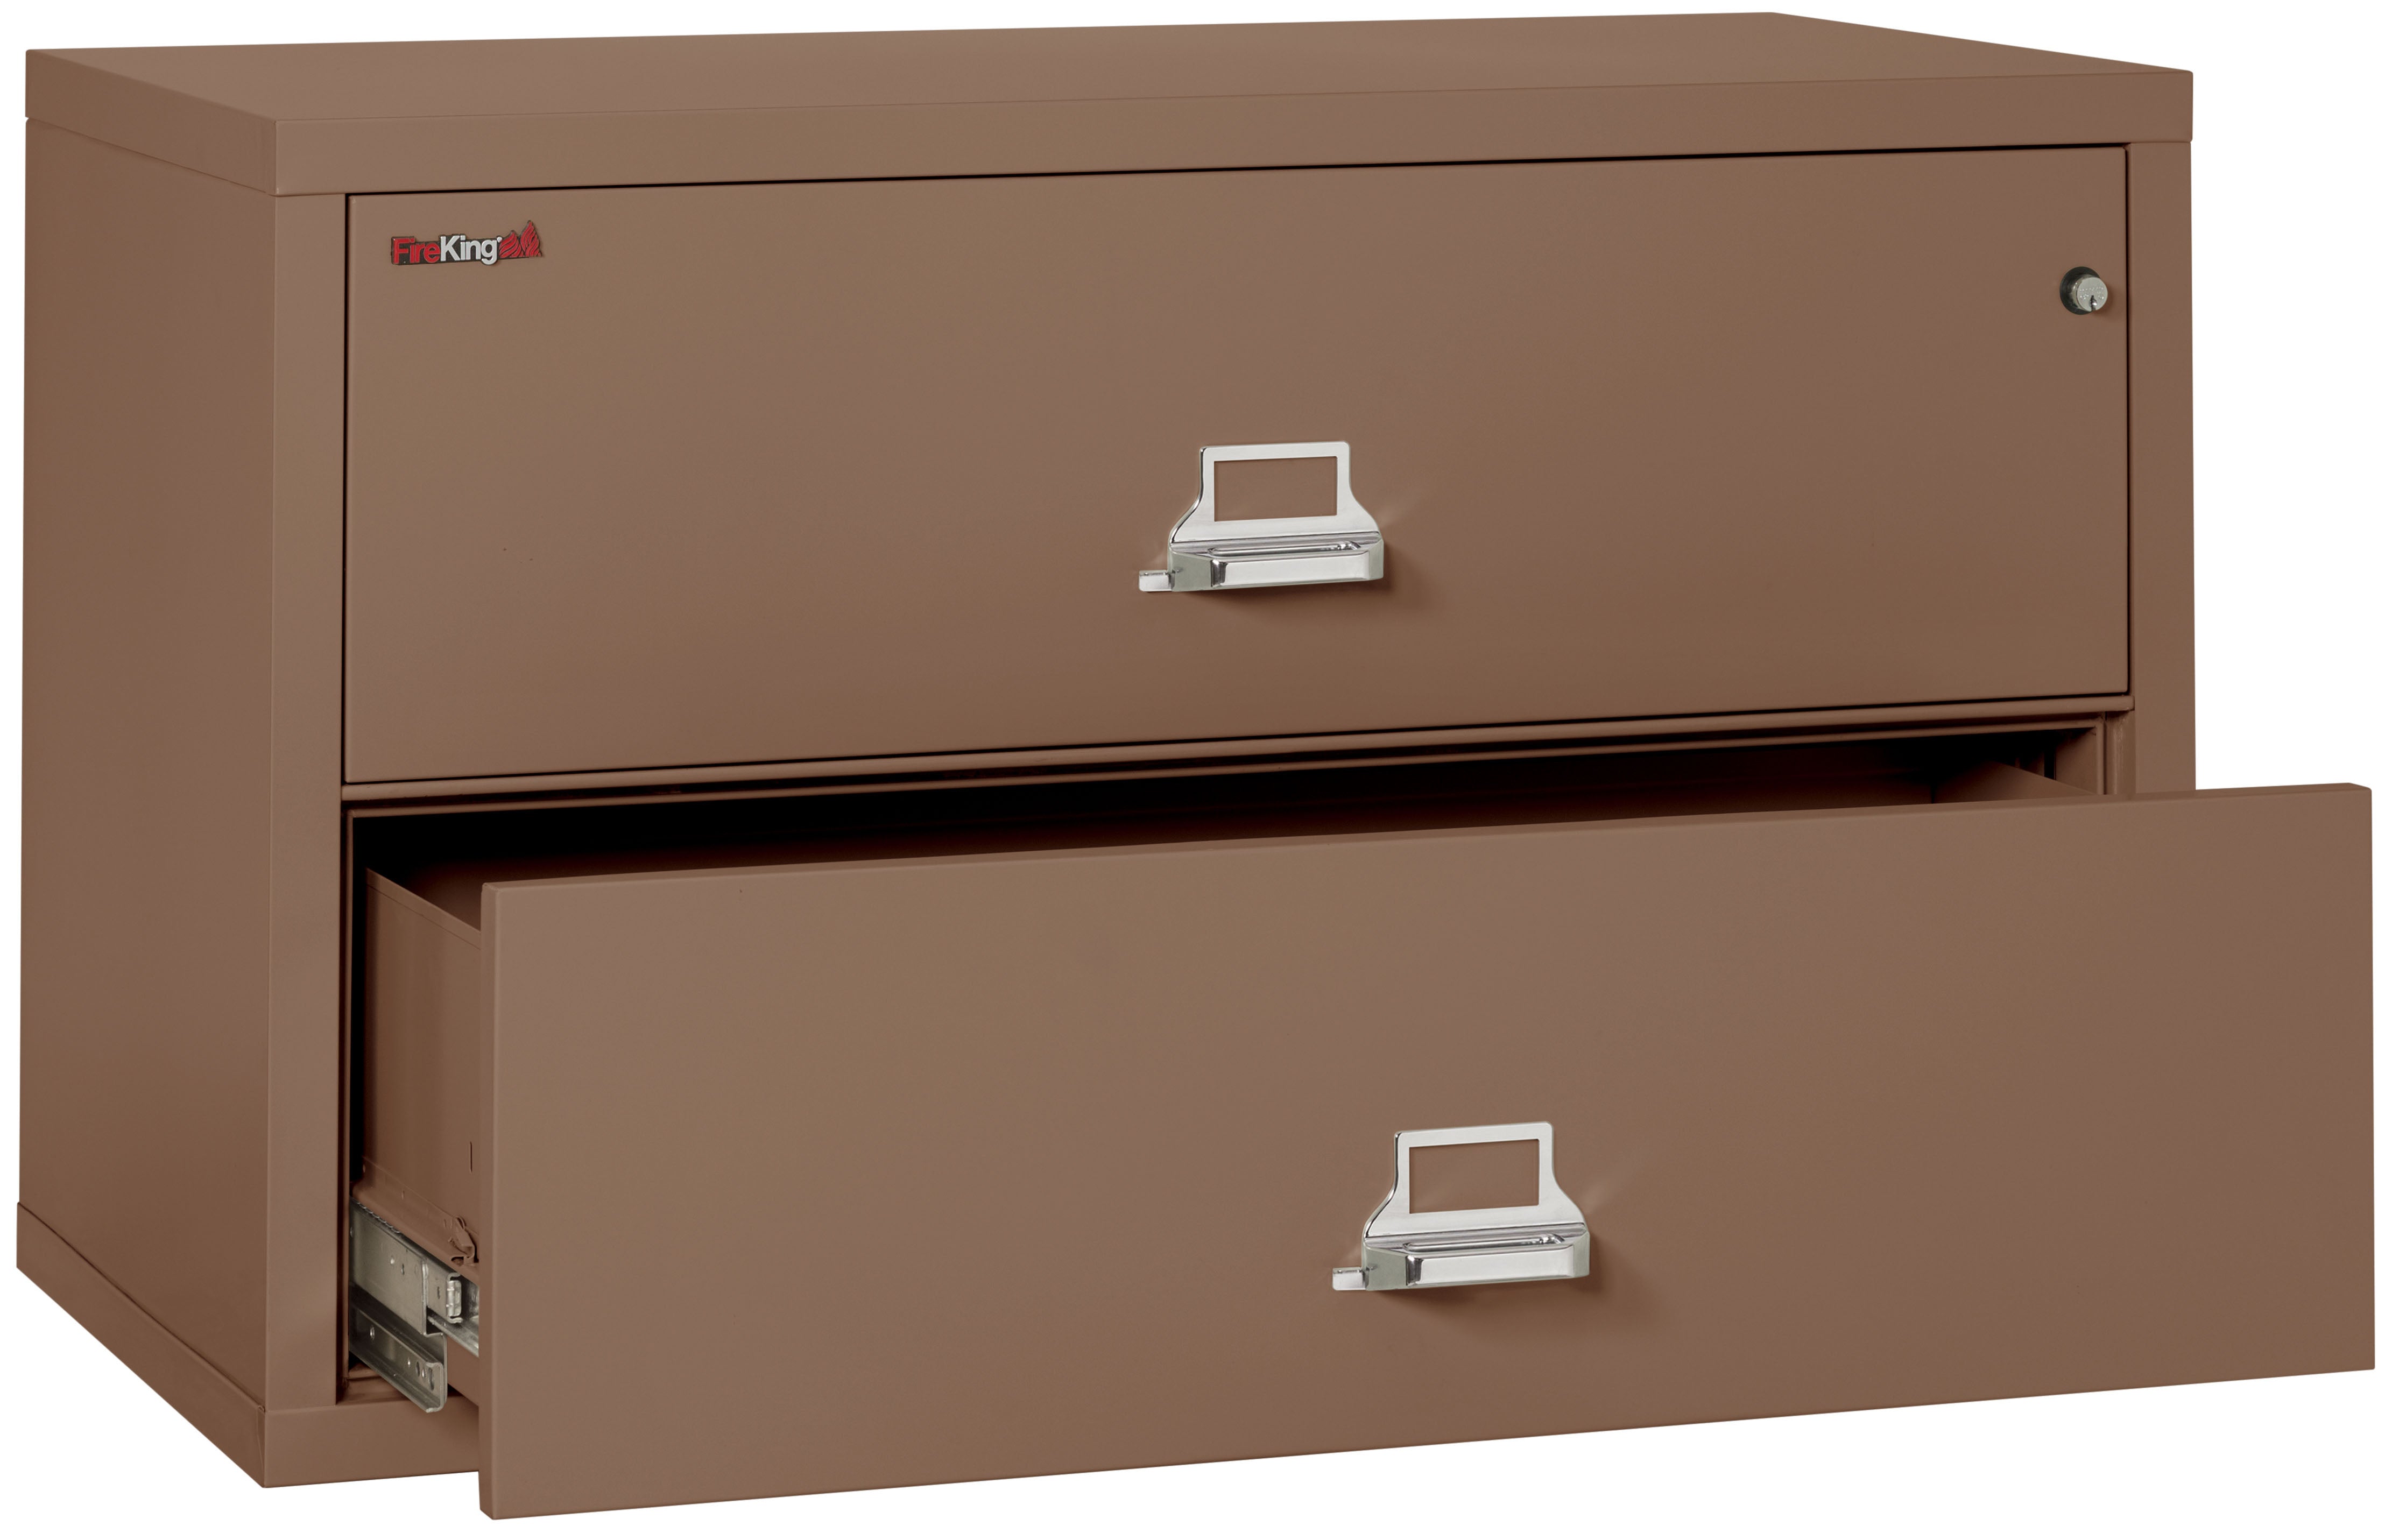 Fire Resistant File Cabinet - 2 Drawer Lateral 44" wide